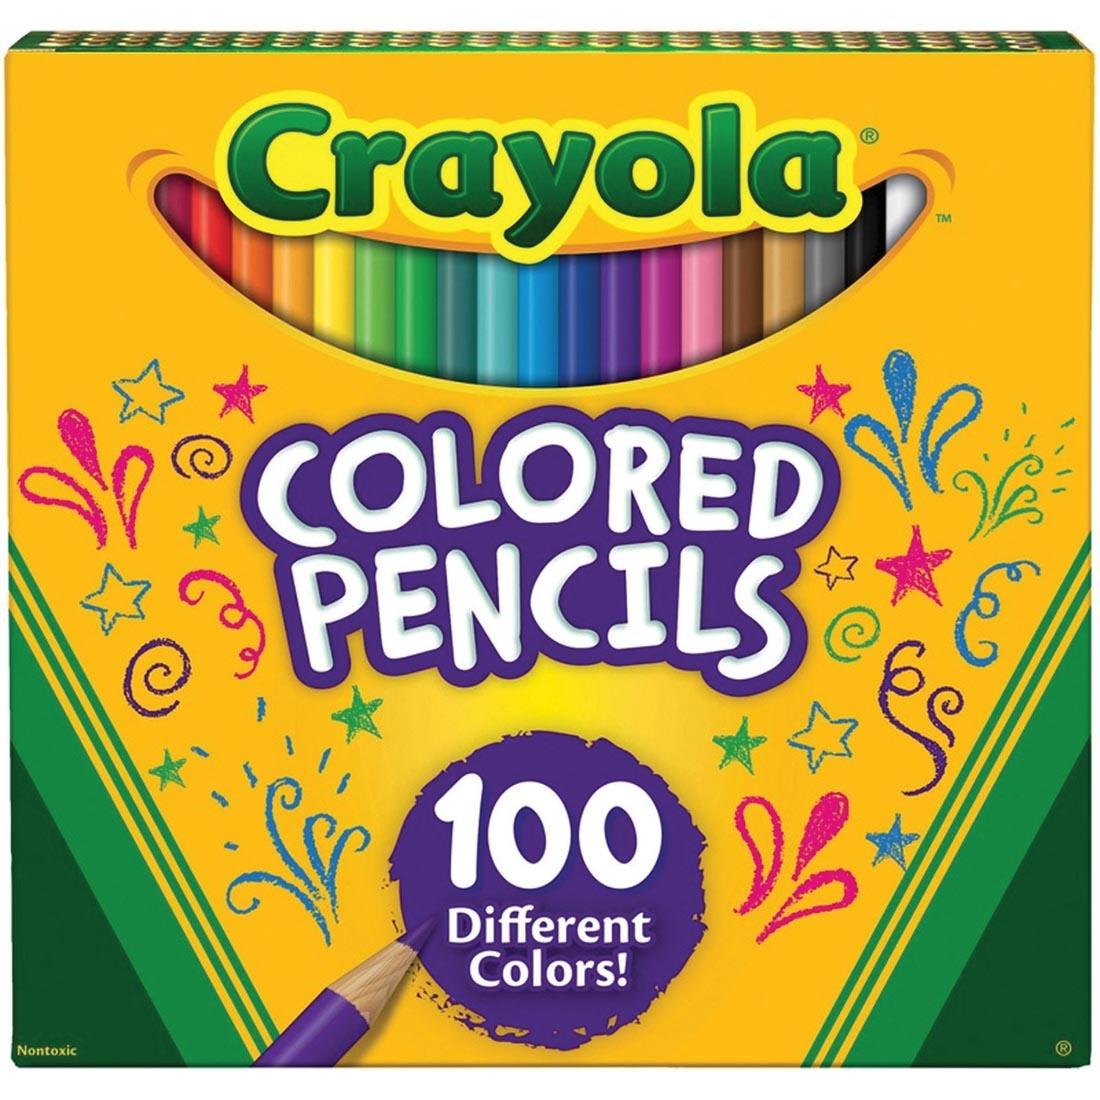 Box of Crayola Colored Pencils 100-Color Set with Pencils Coming out the Top